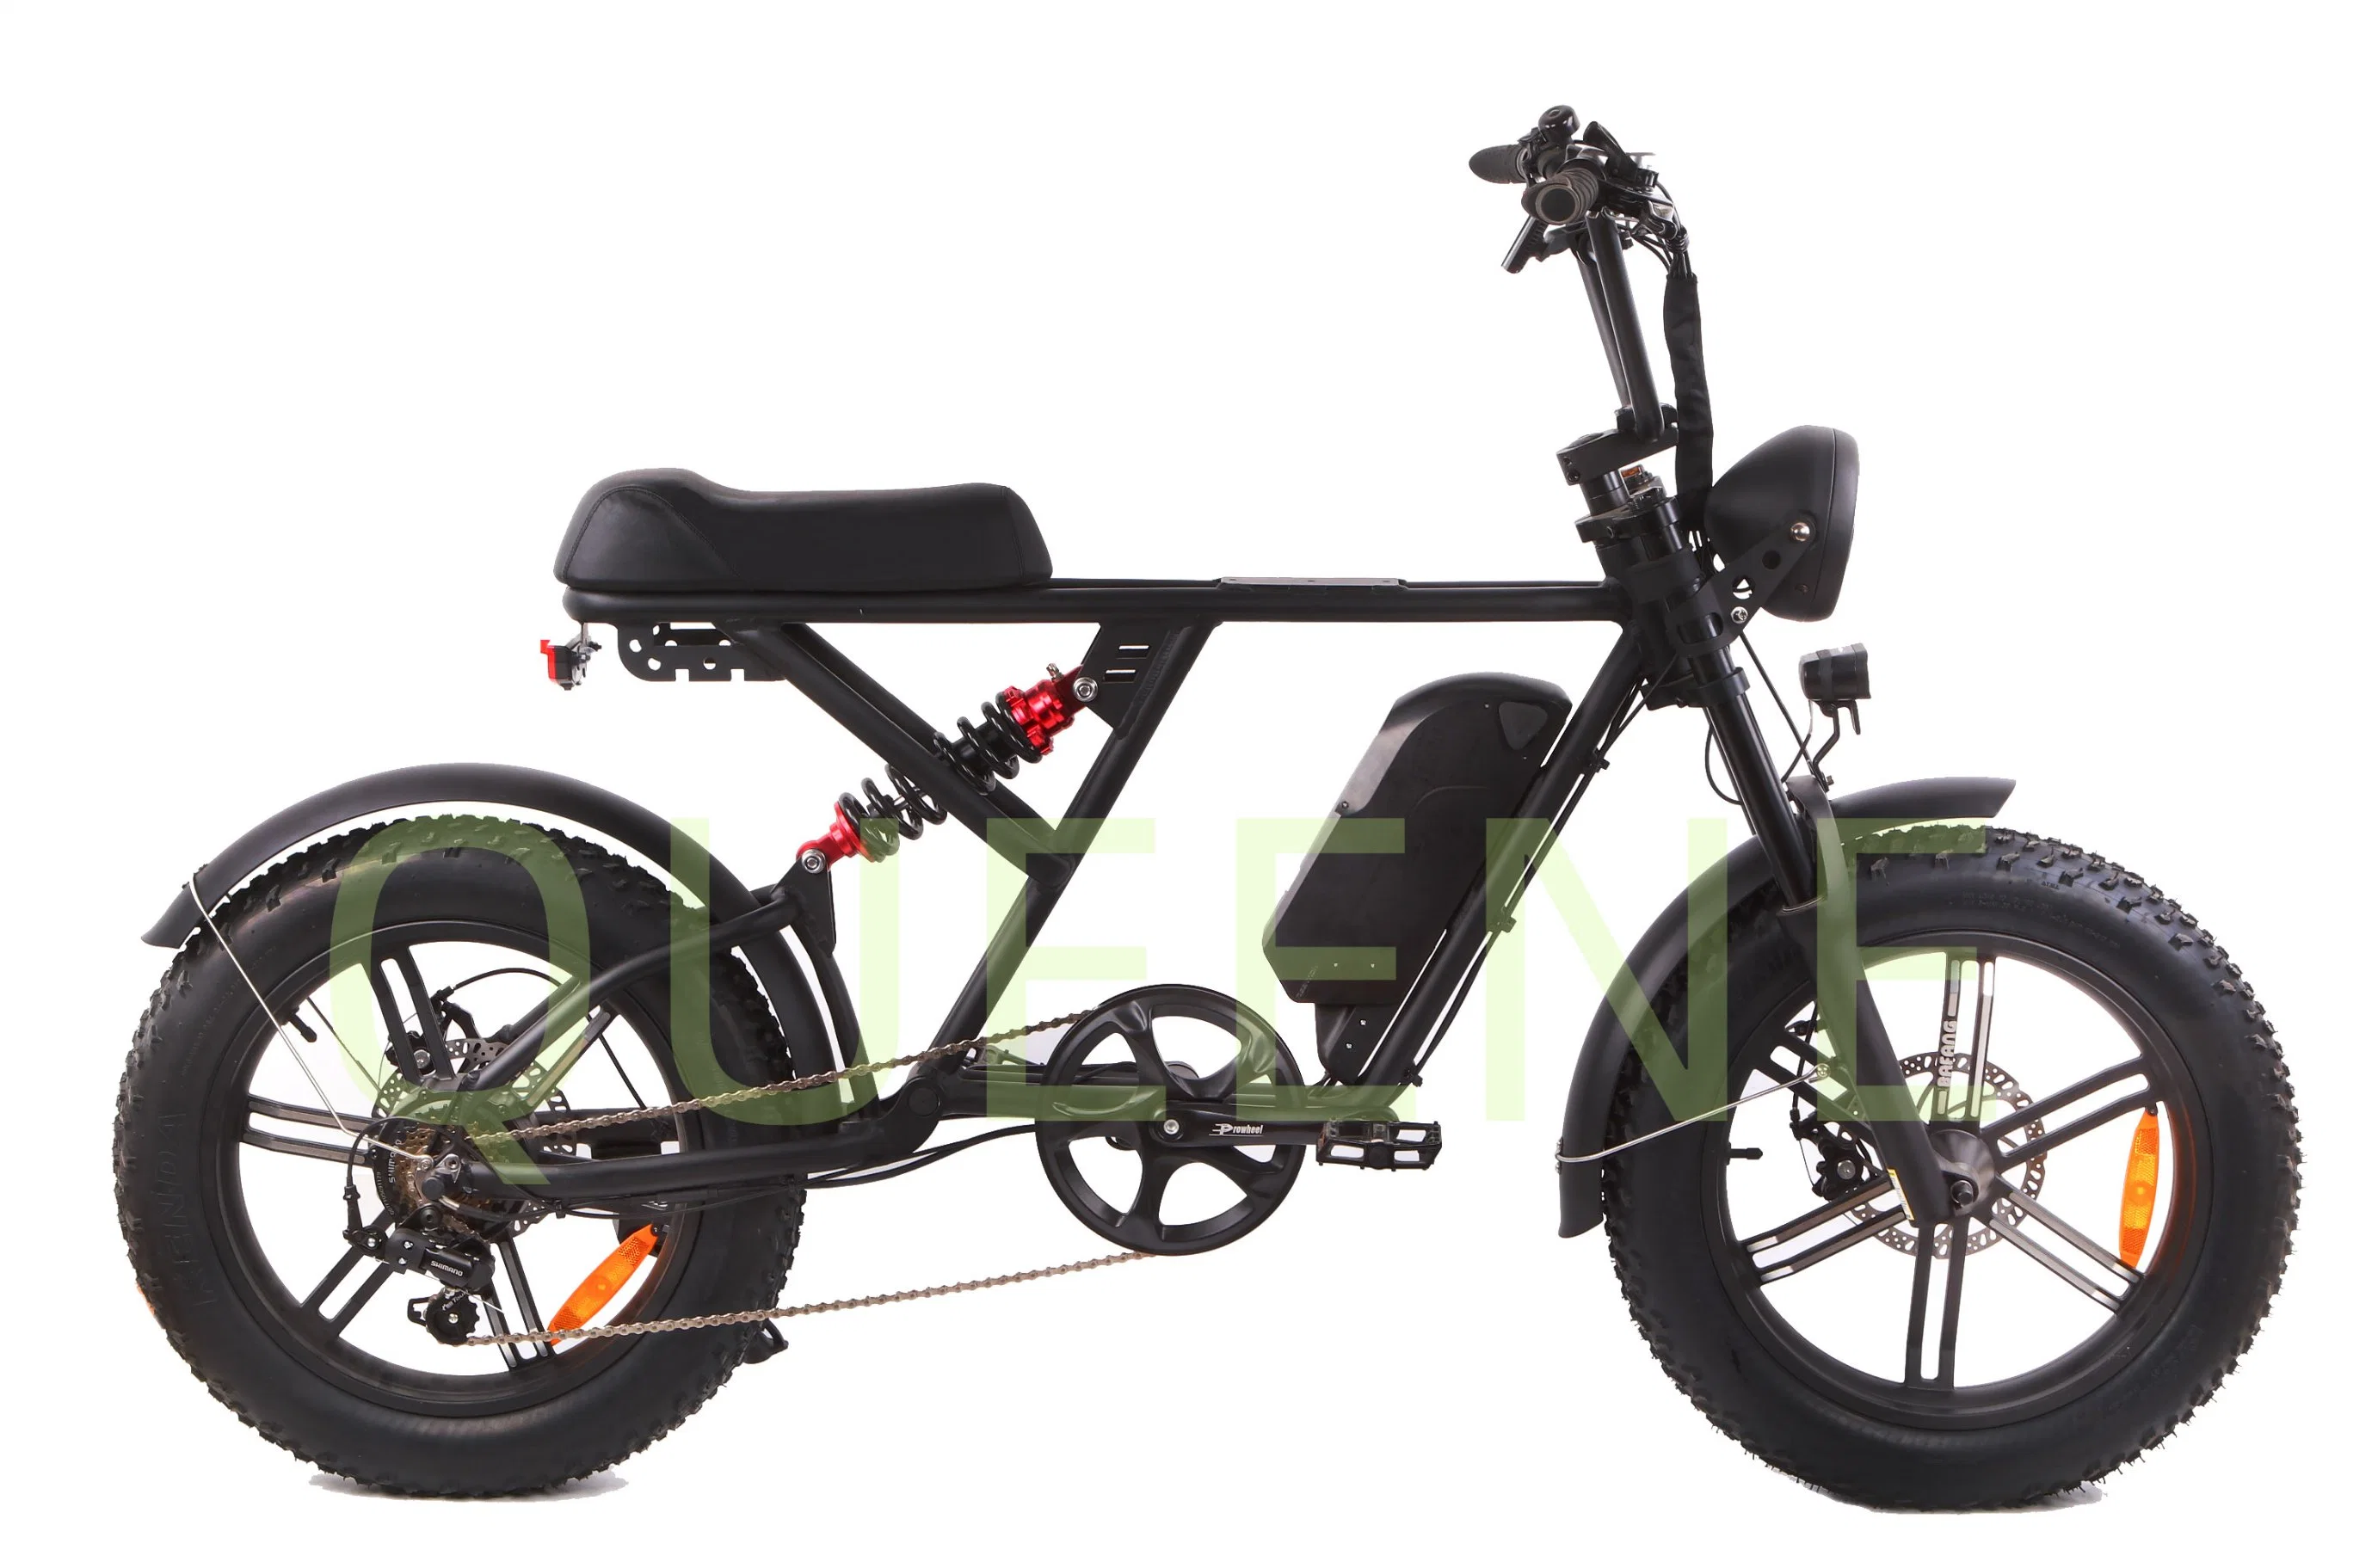 48V 500W 750W 1000W Power China Cheap Full Suspension Retro Vintage Ebike Dirt Mountain Fat Tire Bicycle Electric Bike